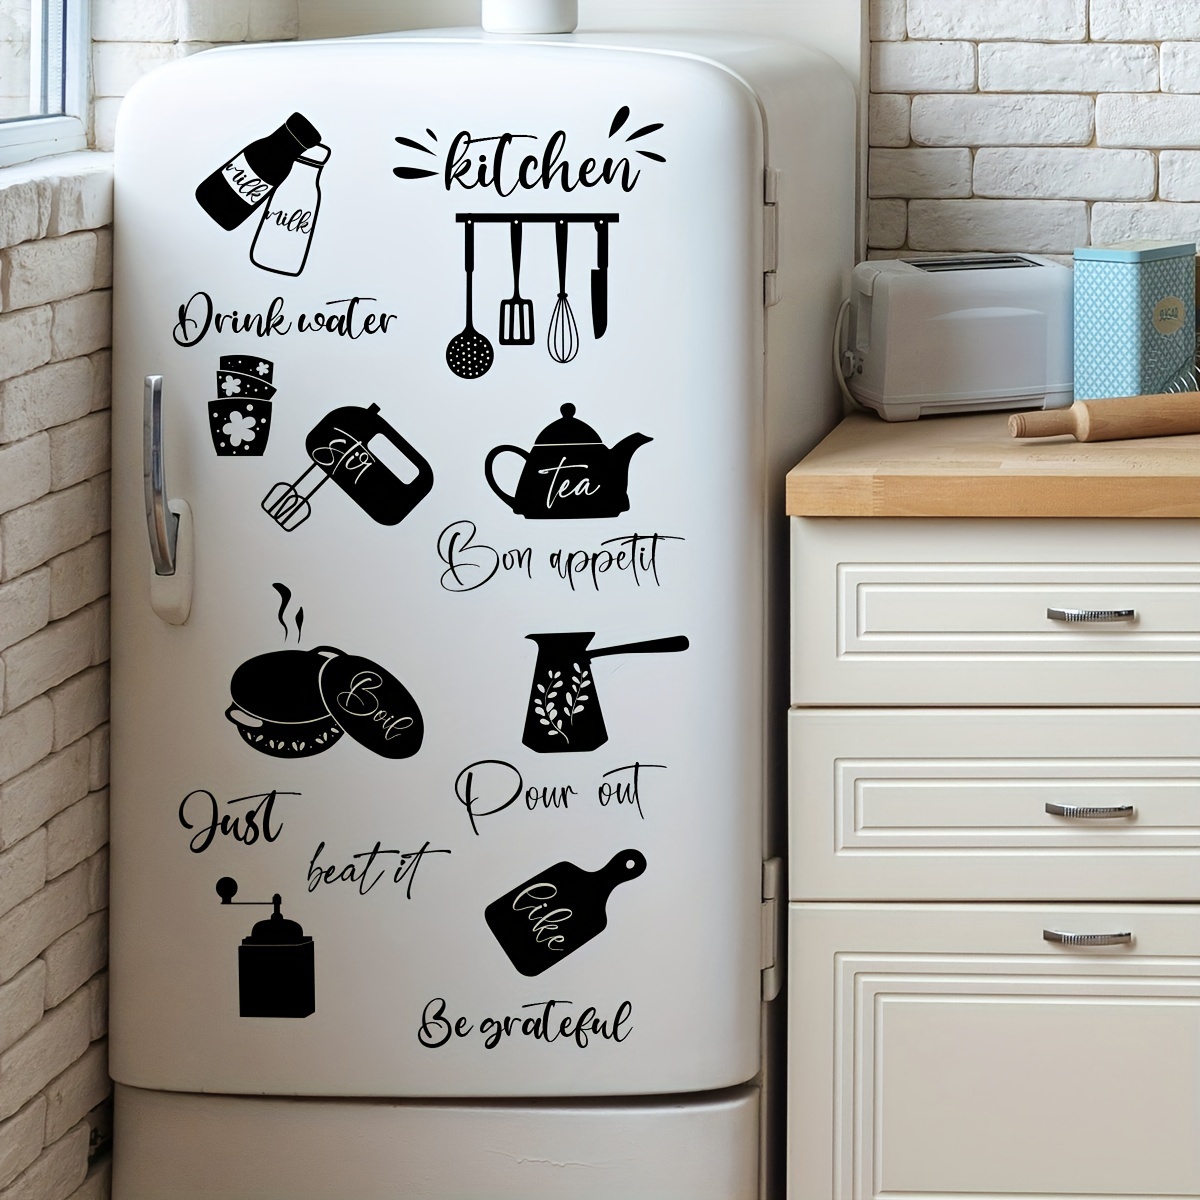 

Pvc Kitchen Decor Decals Set – Removable Easy Peel Wall Stickers, Food & Beverage Motifs For Home, Office, Cafe – Water Resistant, No Residue Vinyl Labels (solid Color)